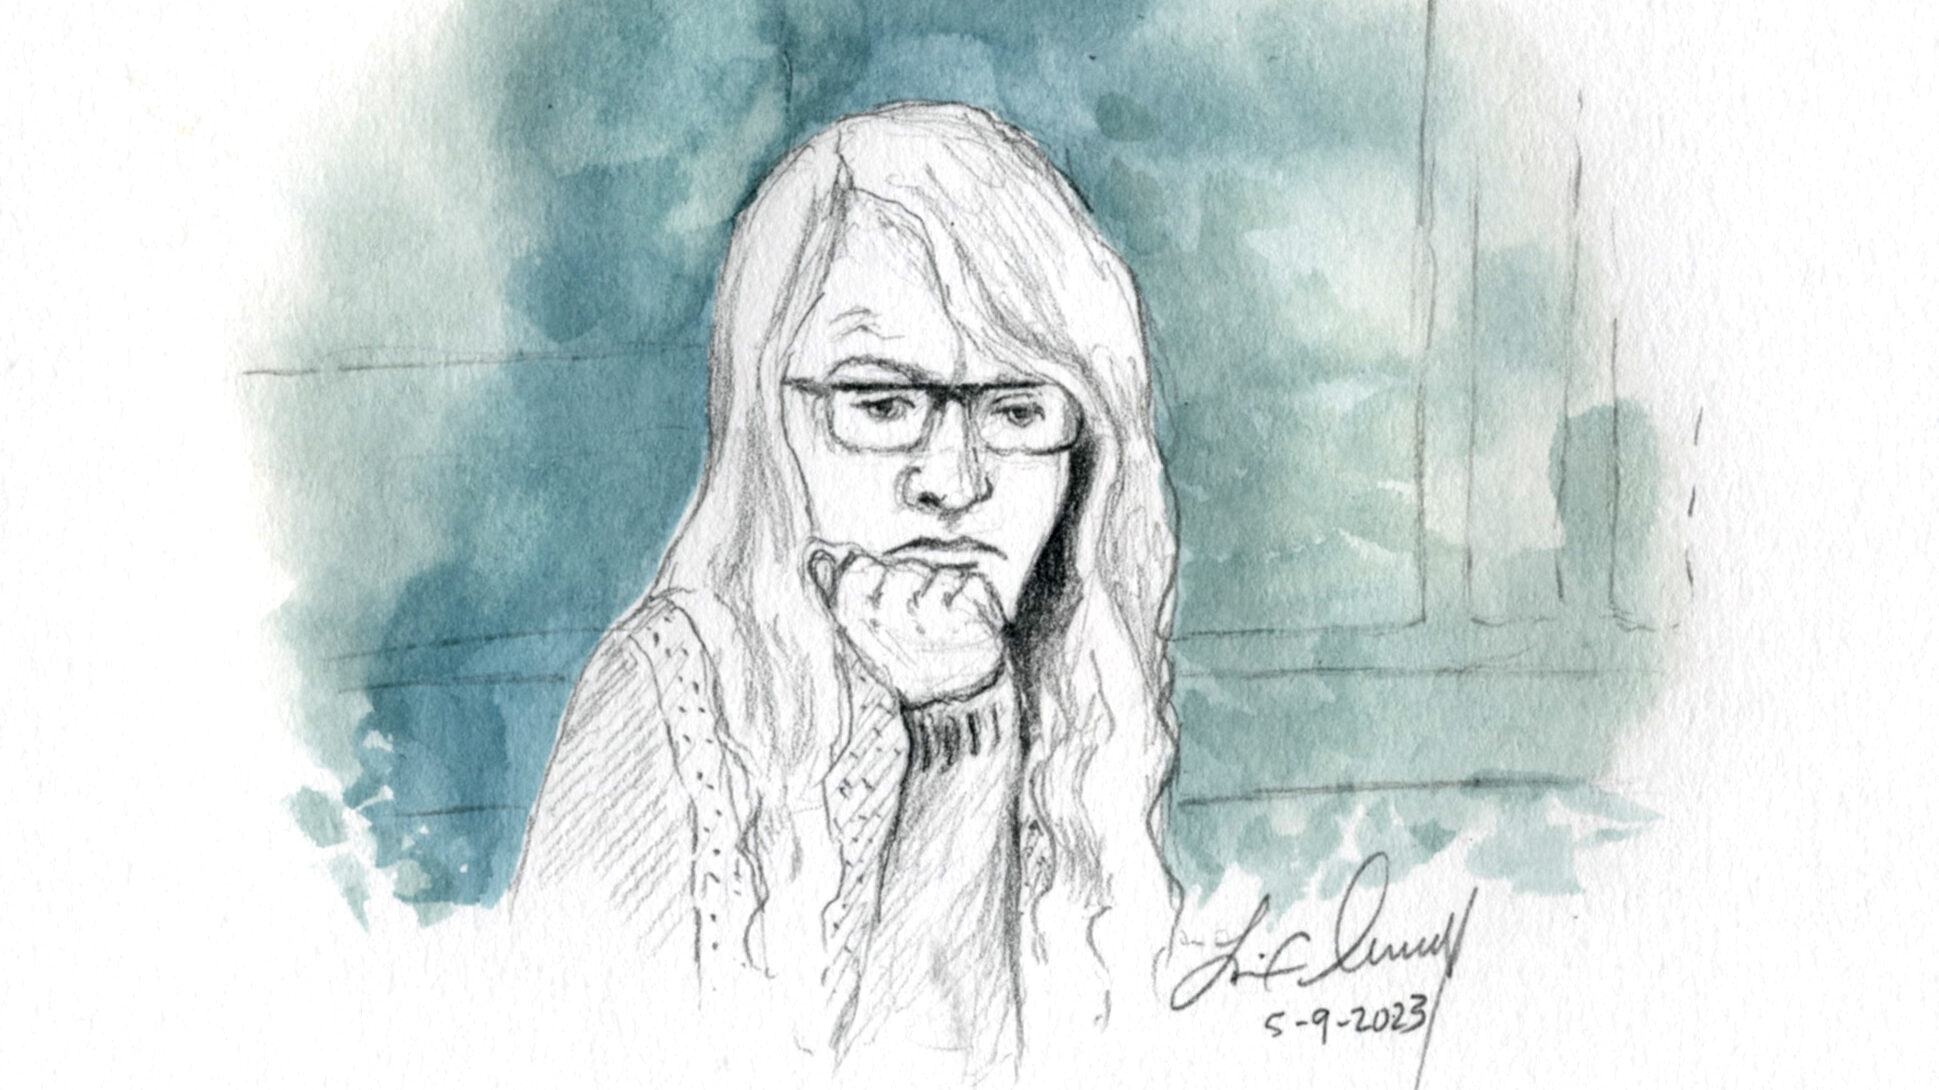 a courtroom sketch of lori vallow daybell is pictured...